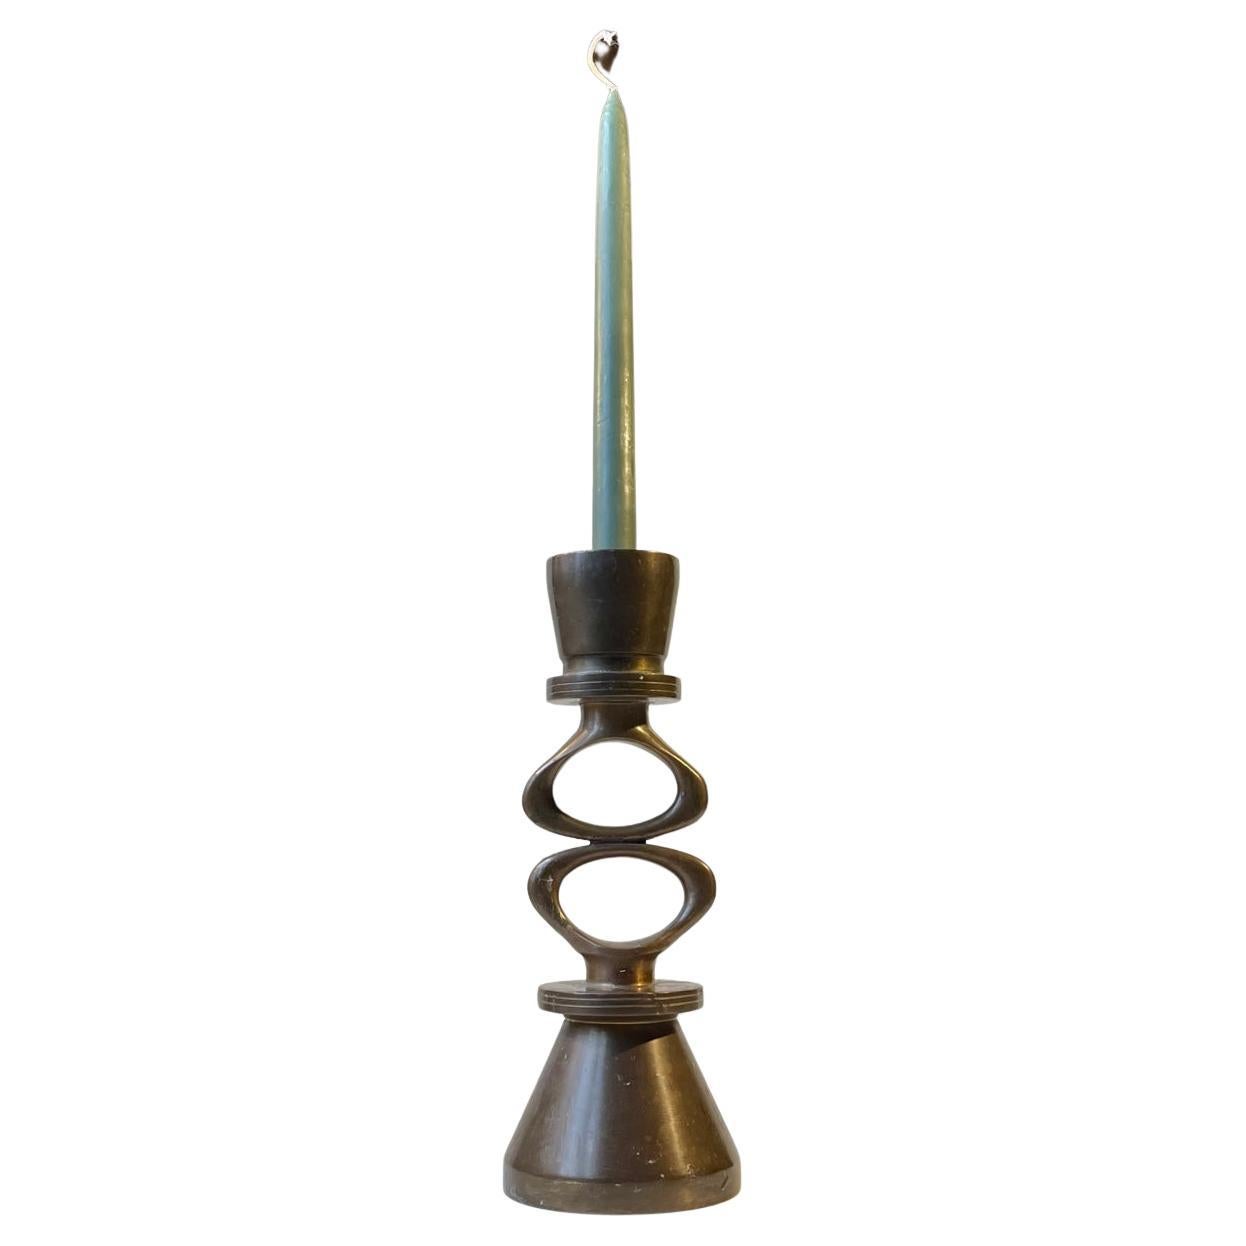 Sculptural, Abstract & Symbolic Candleholder in Bronze, Scandinavia, 1970s For Sale